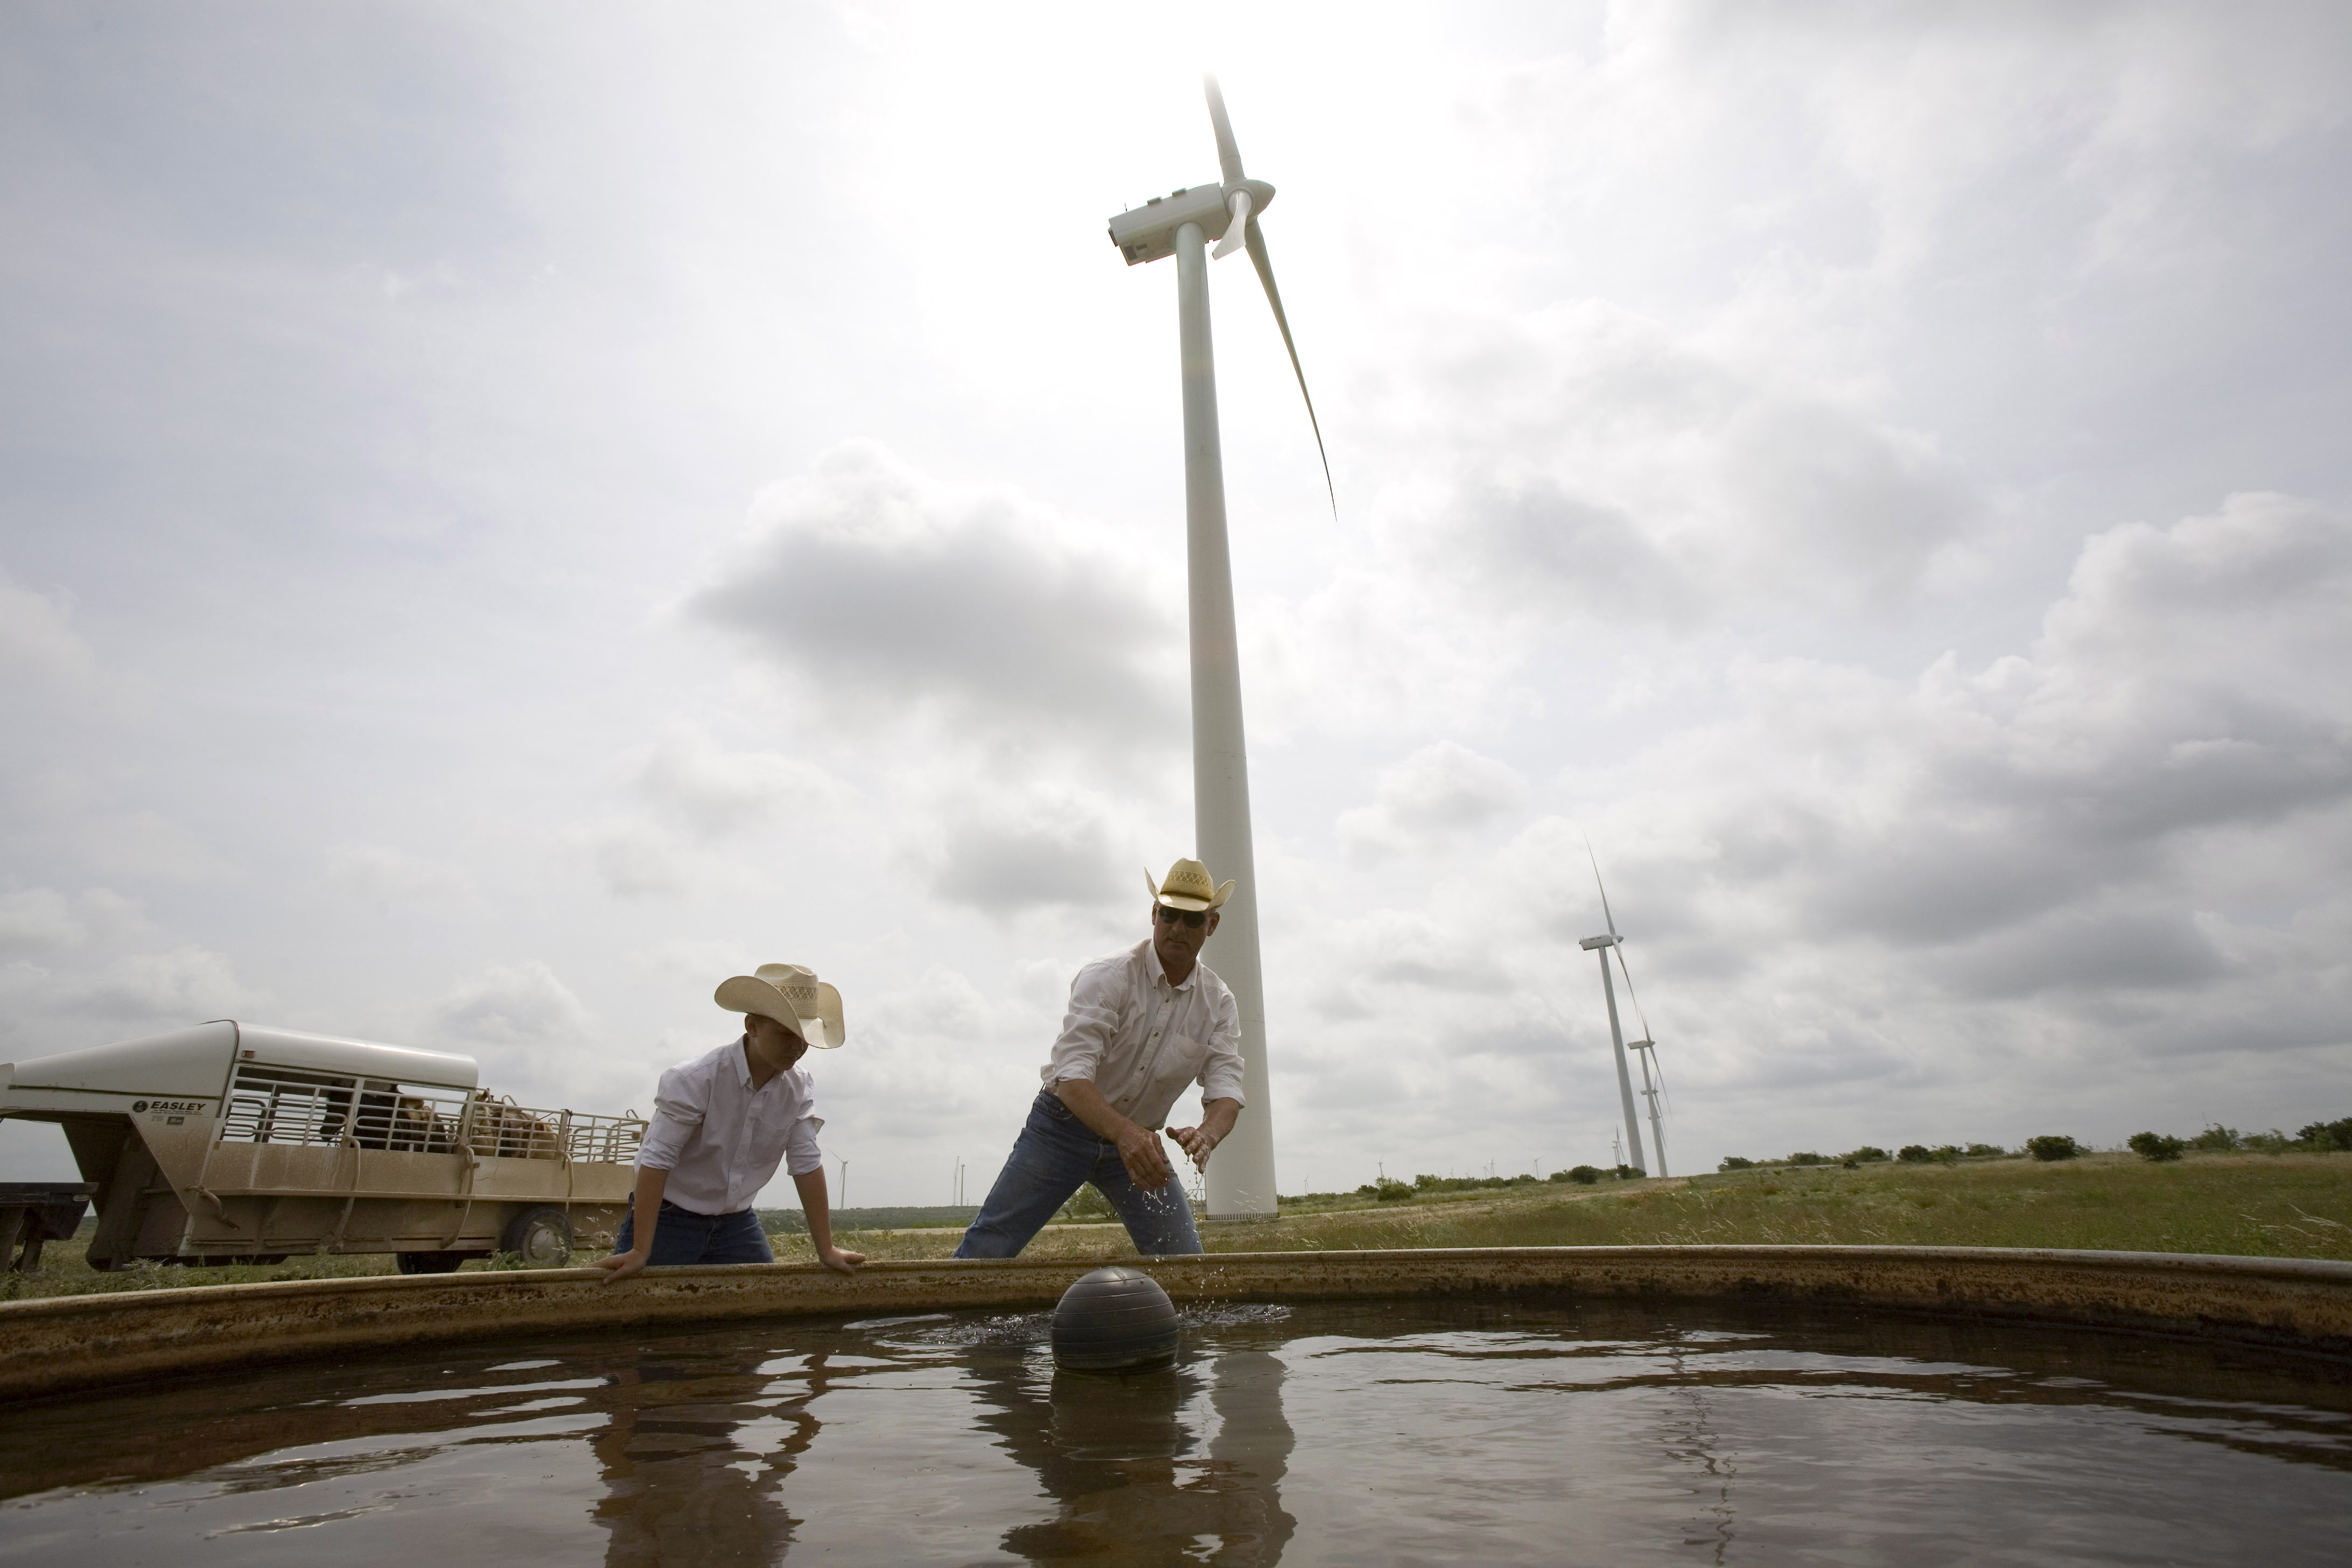 A cattle rancher and his son clean a water tank for their 300 head of cattle on the Lone Star Wind Farm near Abilene, Texas, on June 9, 2007.